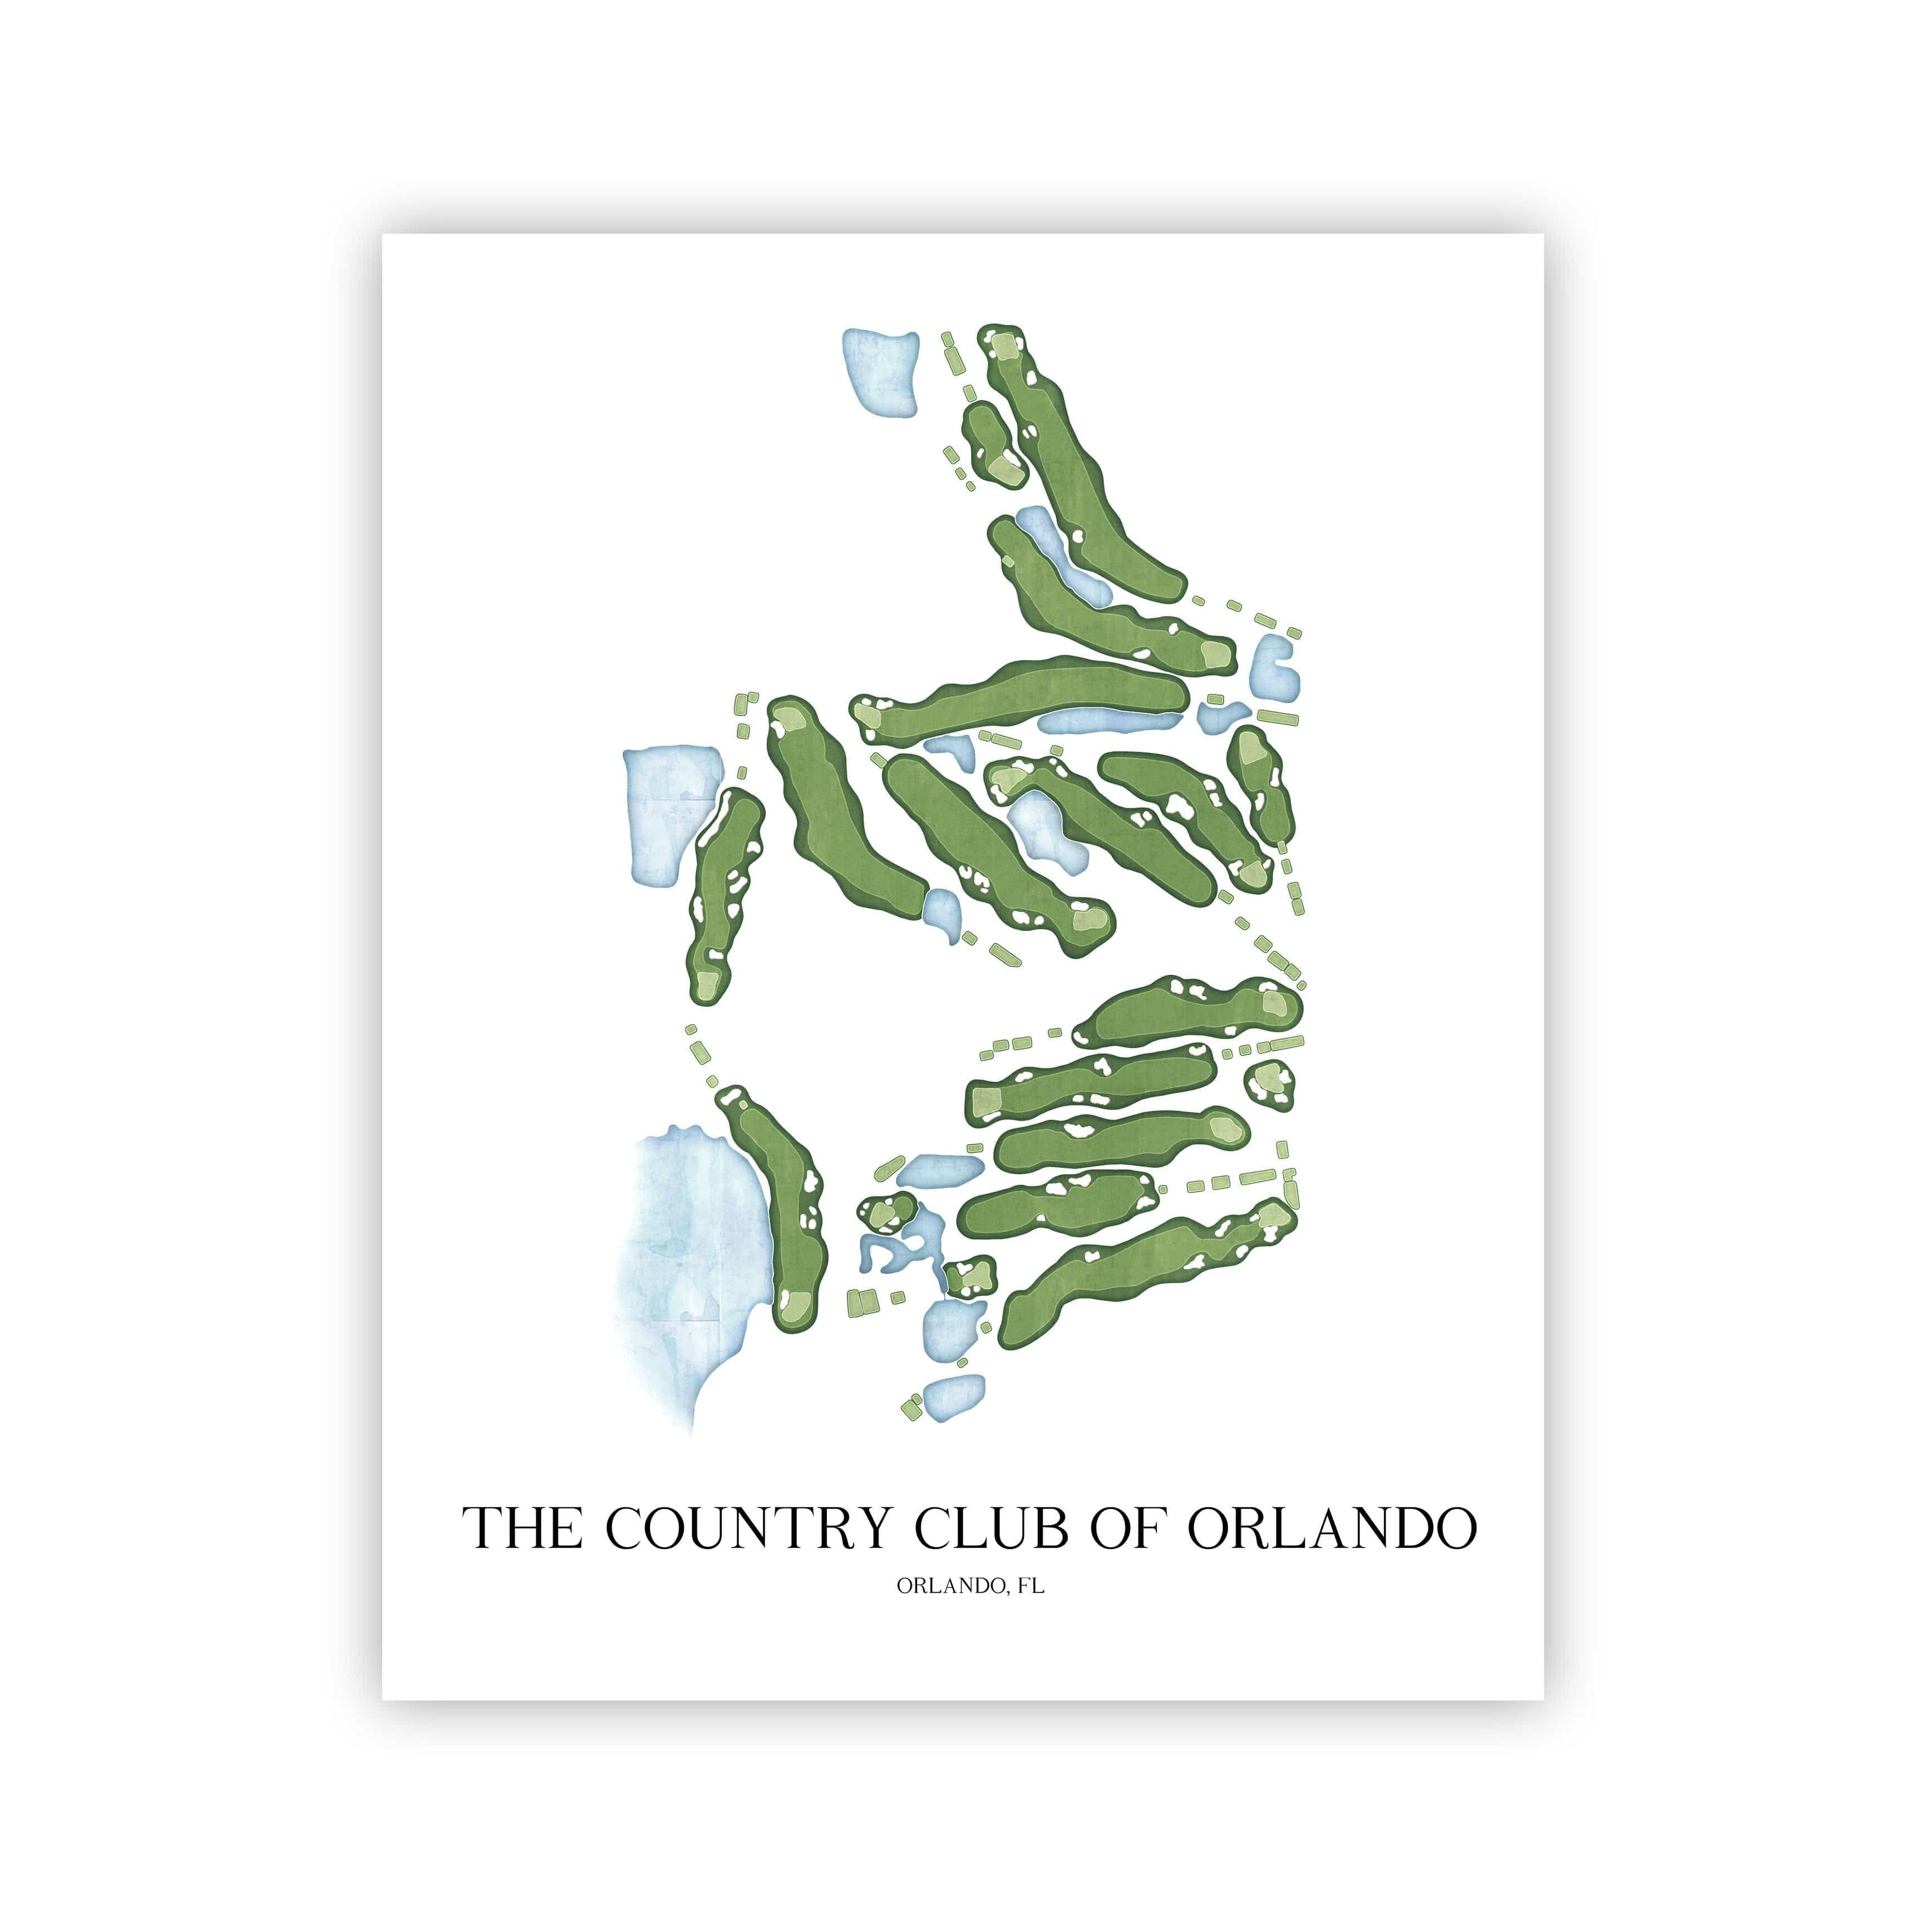 The 19th Hole Golf Shop - Golf Course Prints -  The Country Club of Orlando Golf Course Map